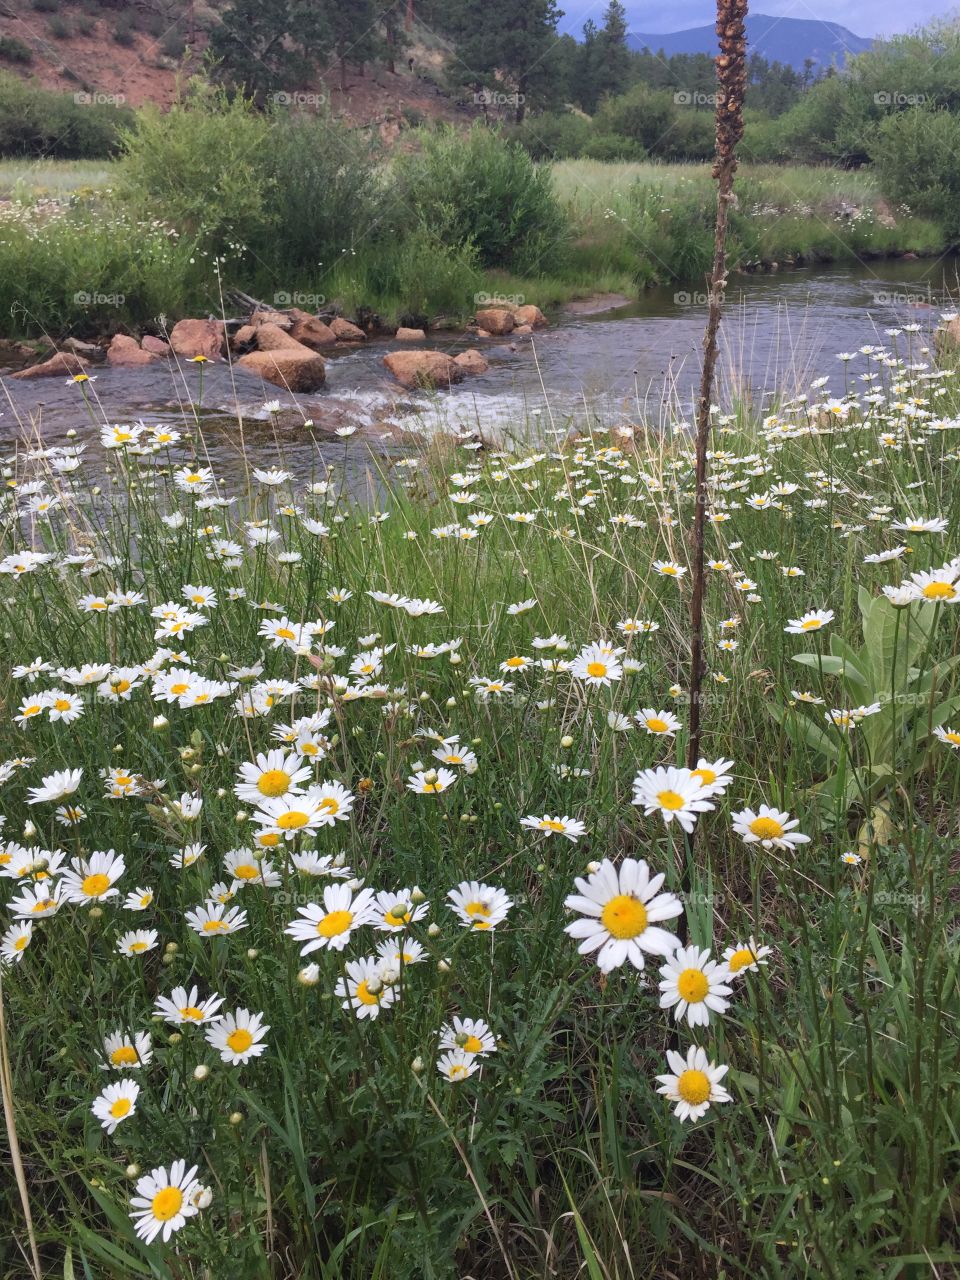 Colorado Valley filled with Flowers